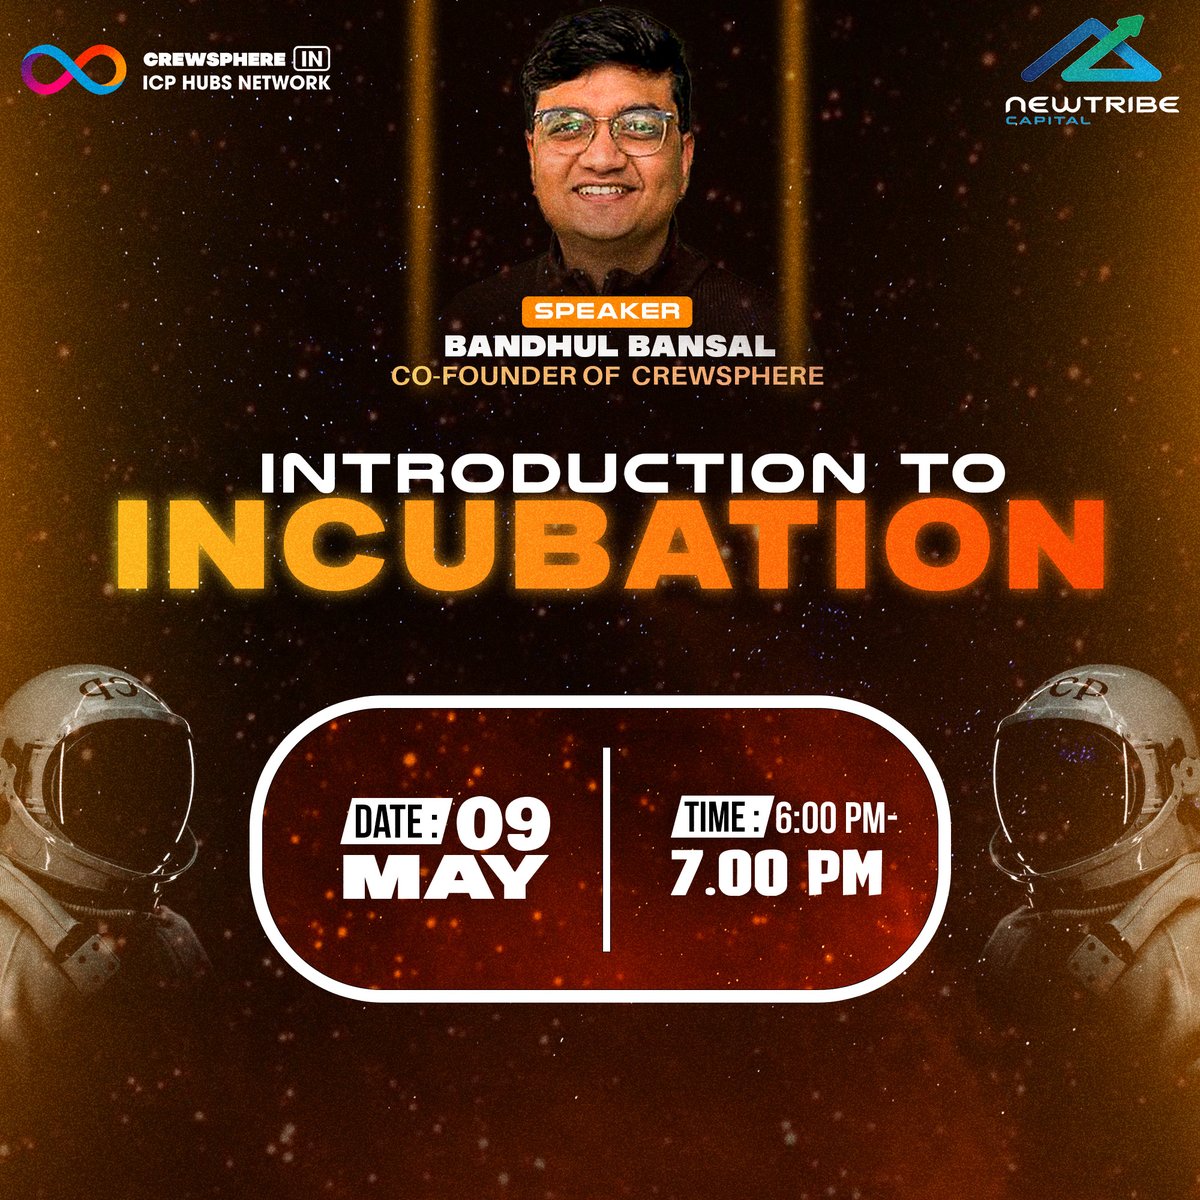 Get ready for our 'Introduction to Incubation' event! Discover how we support startups with mentorship, resources, and networking opportunities. Join us to learn how we can help and turn your ideas into reality! #ICPhubs